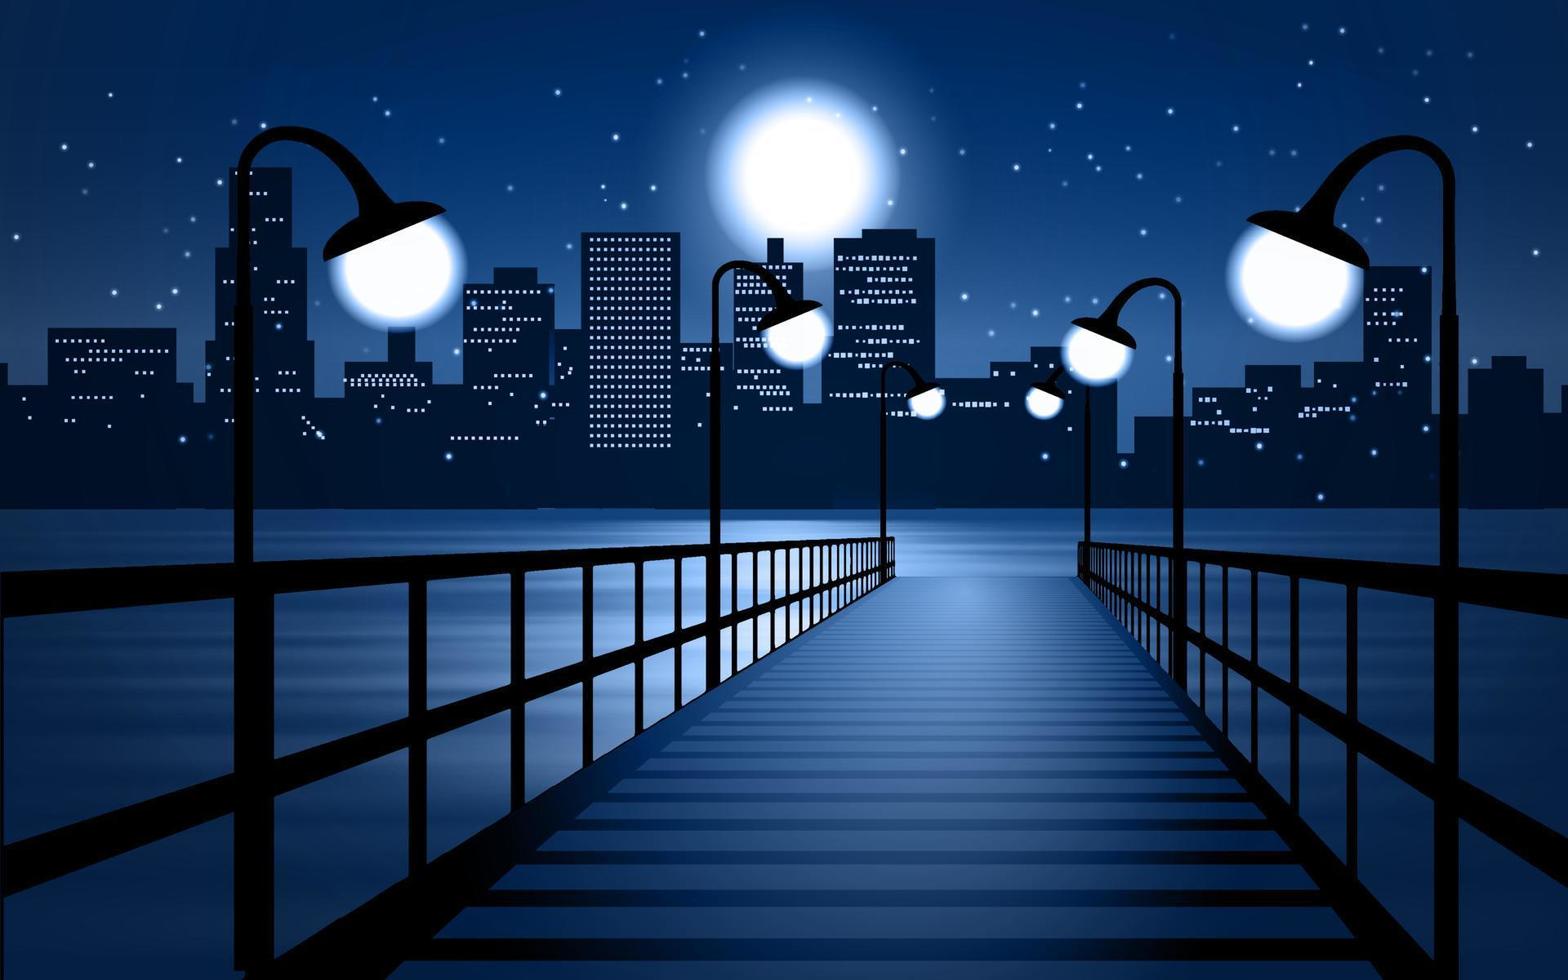 City at night with pier on river vector